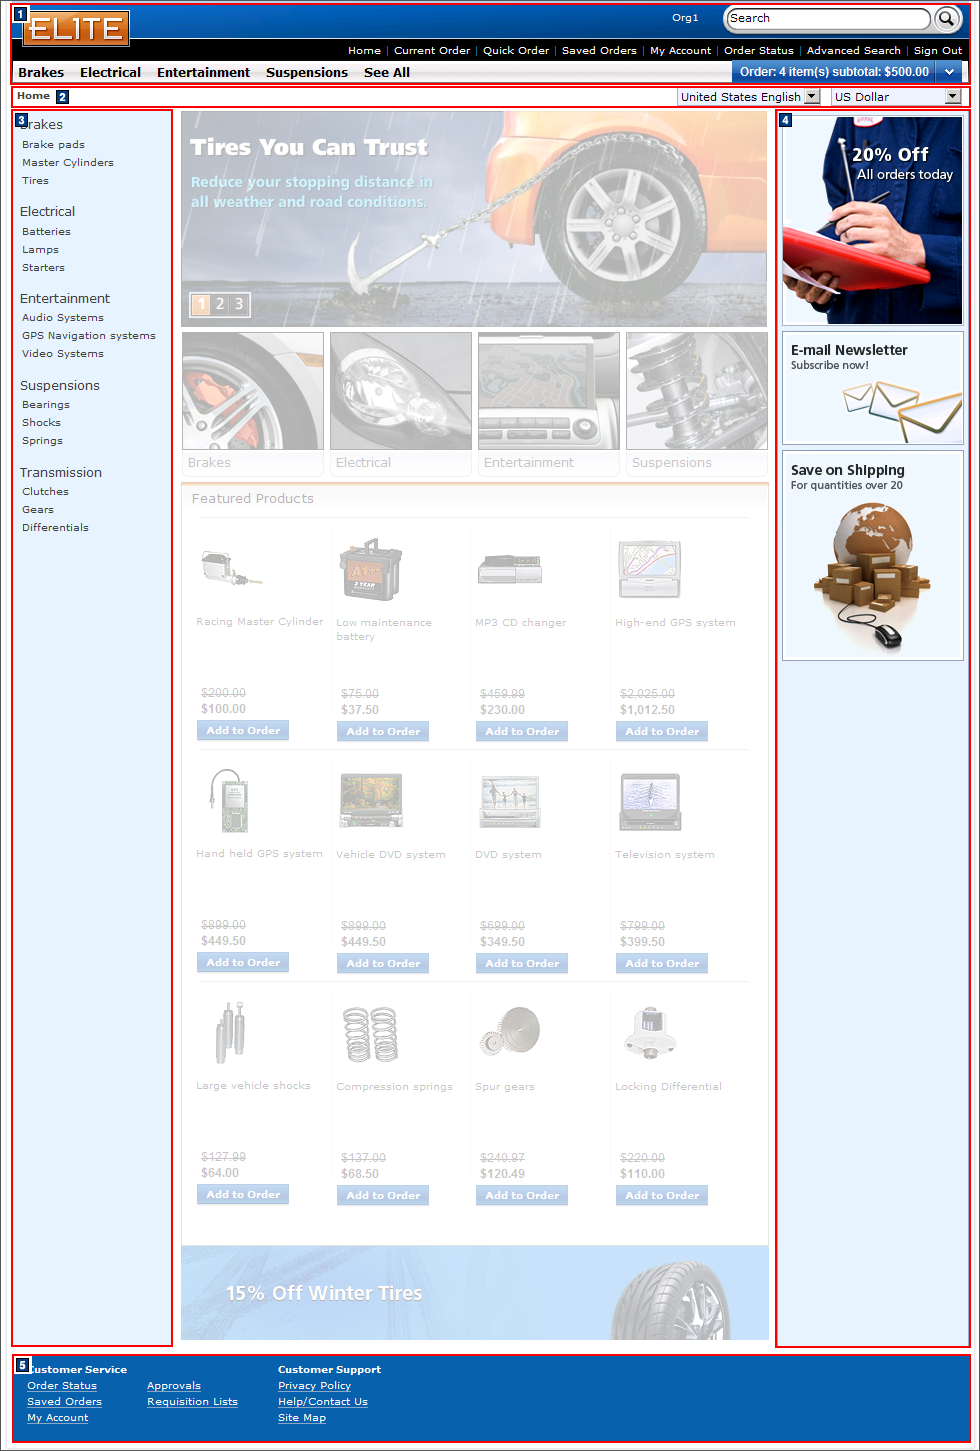 Full size image of Catalog: Overall layout